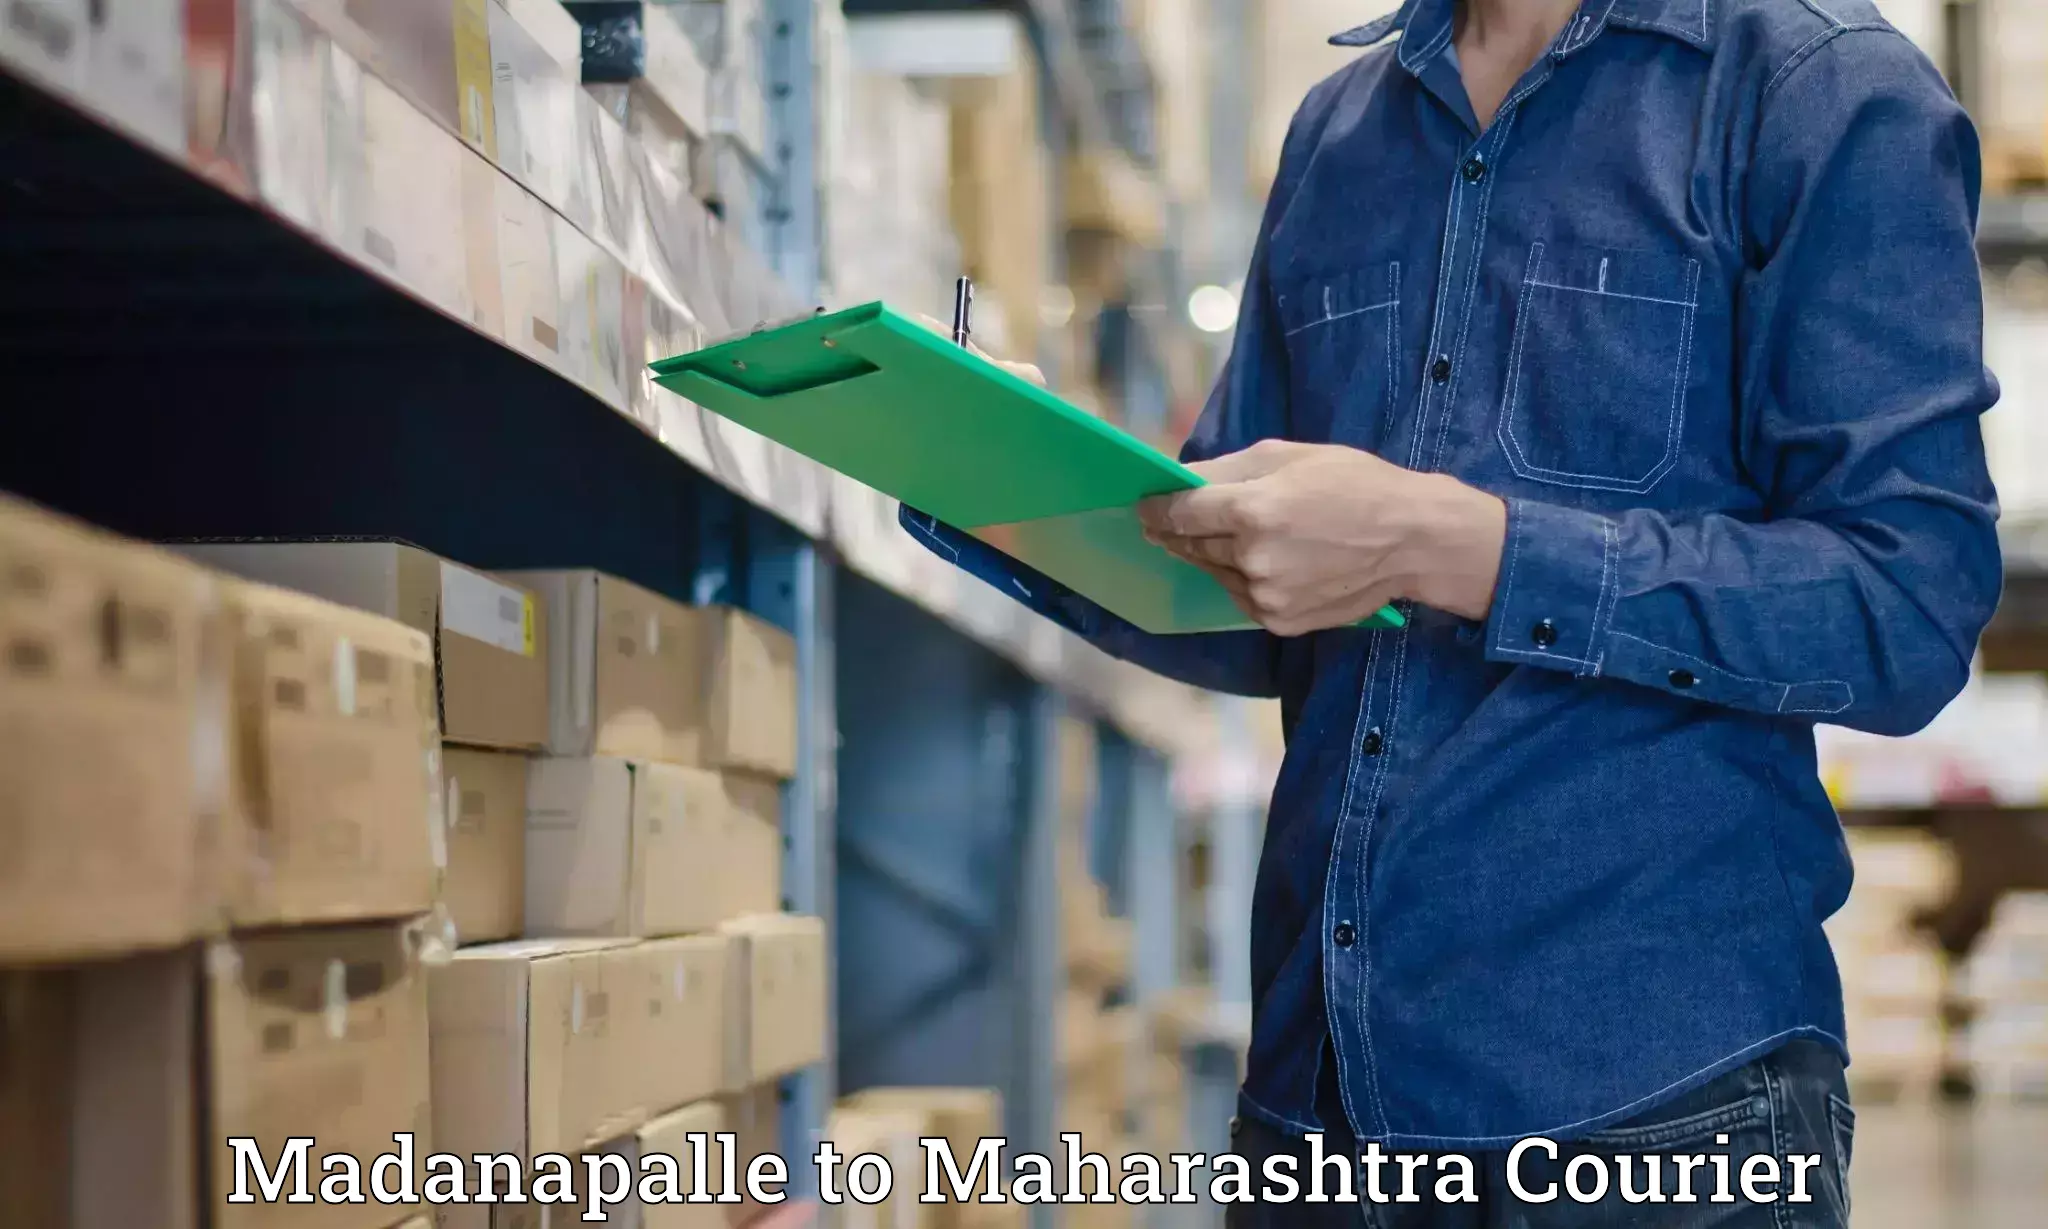 Subscription-based courier Madanapalle to Amdapur